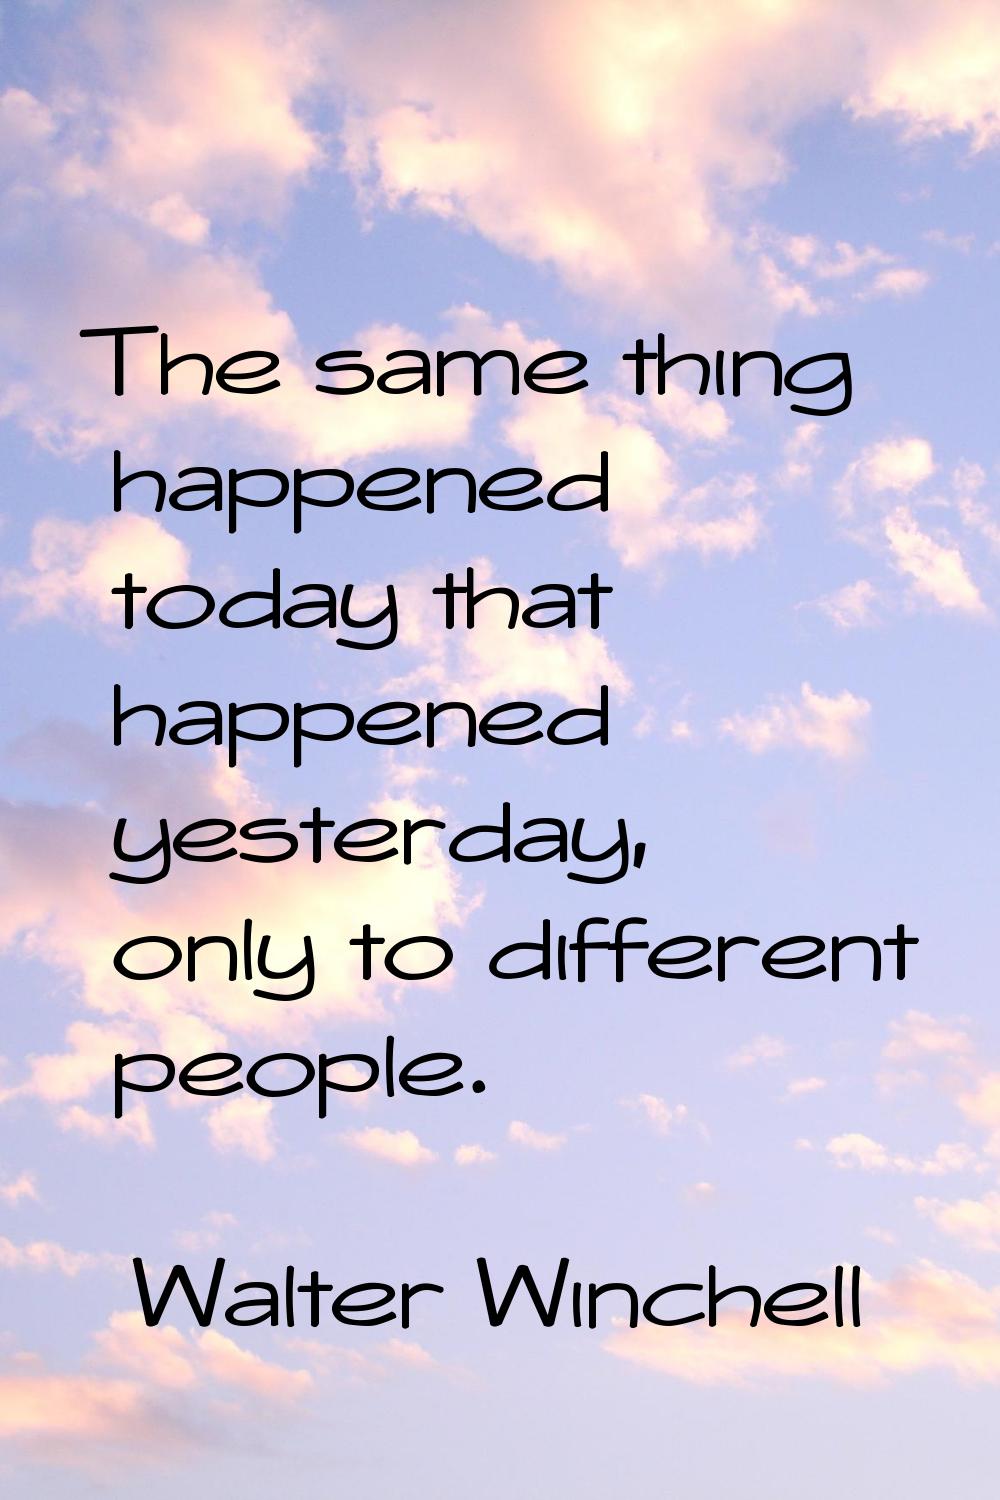 The same thing happened today that happened yesterday, only to different people.